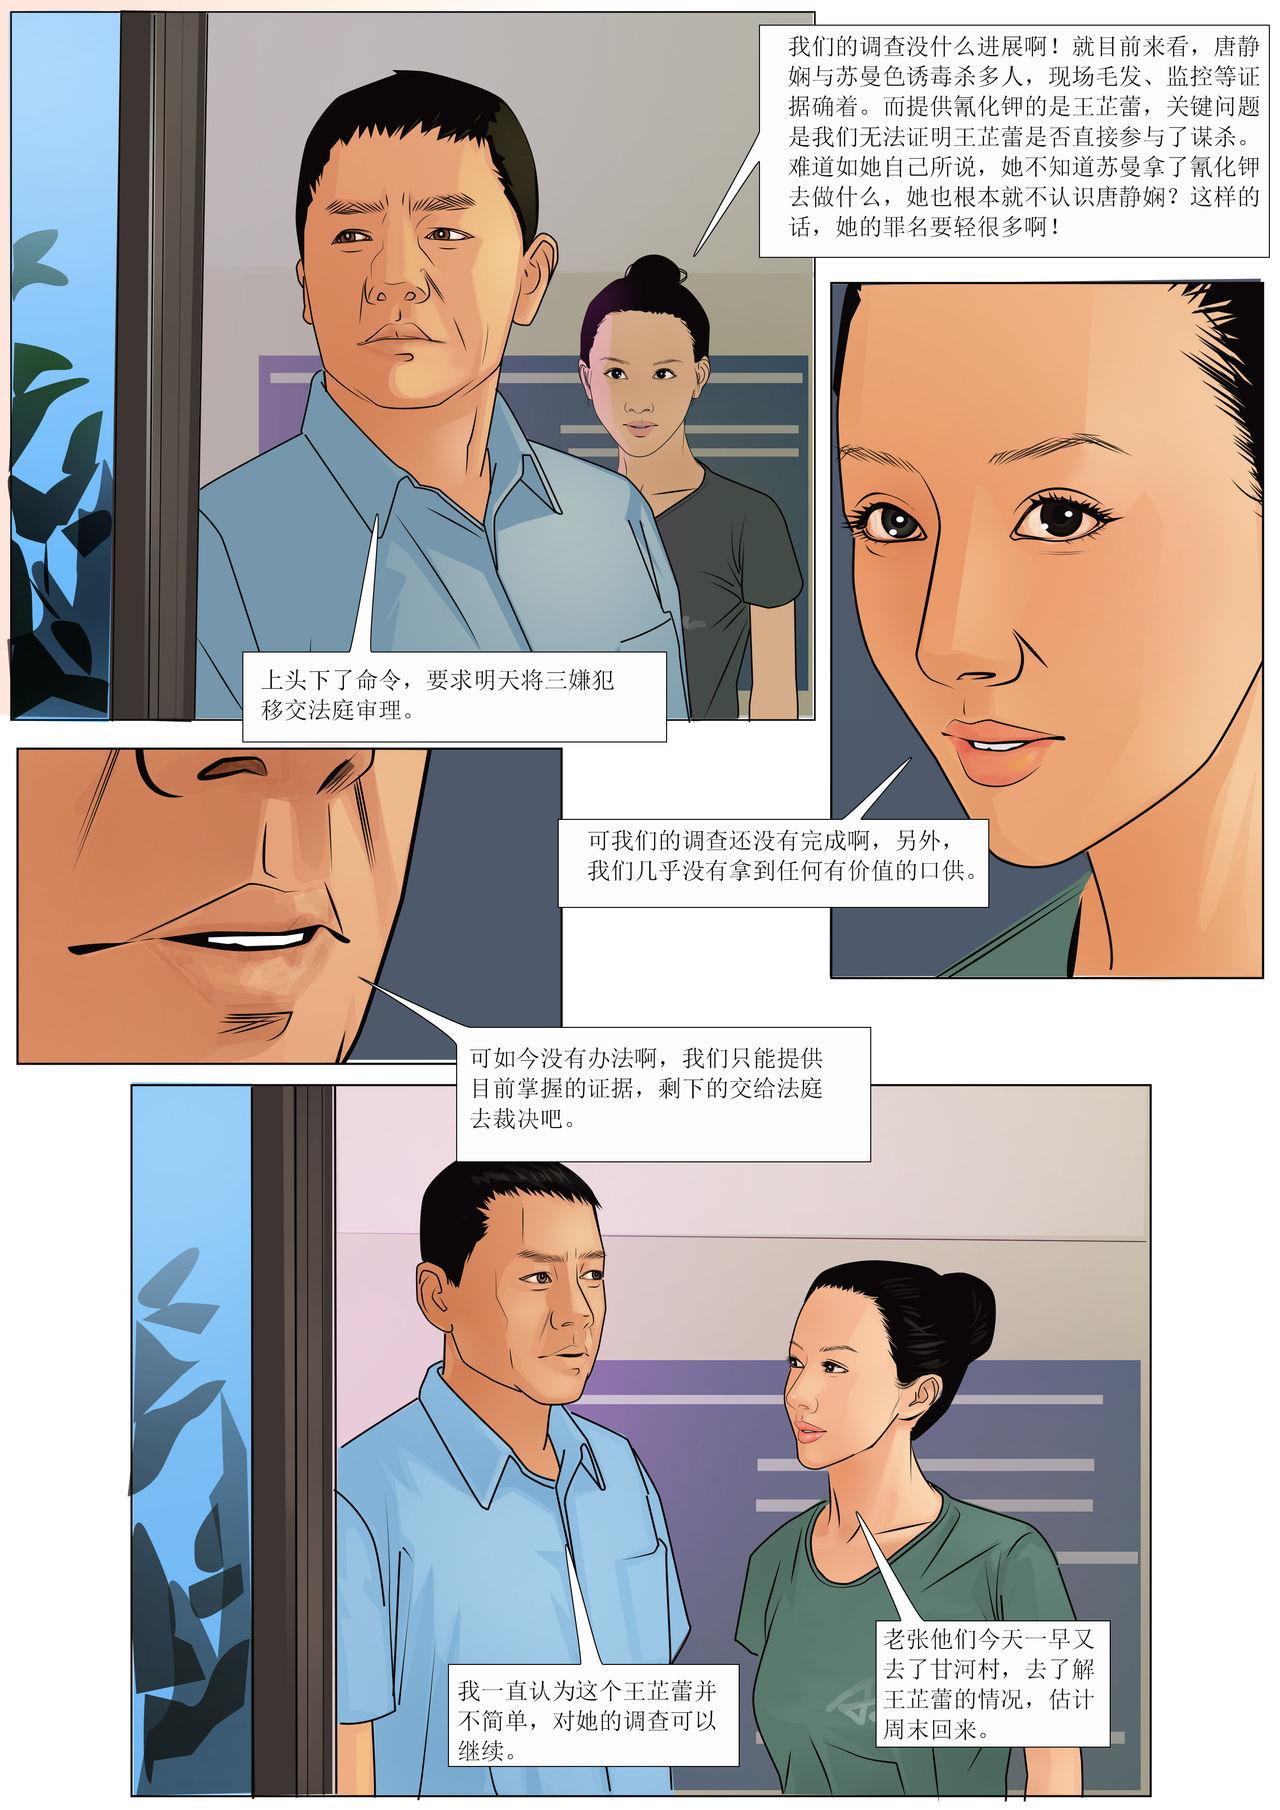 Ginger 枫语漫画 Foryou 《极度重犯》第八话 Three Female Prisoners 8 Chinese Hair - Page 6